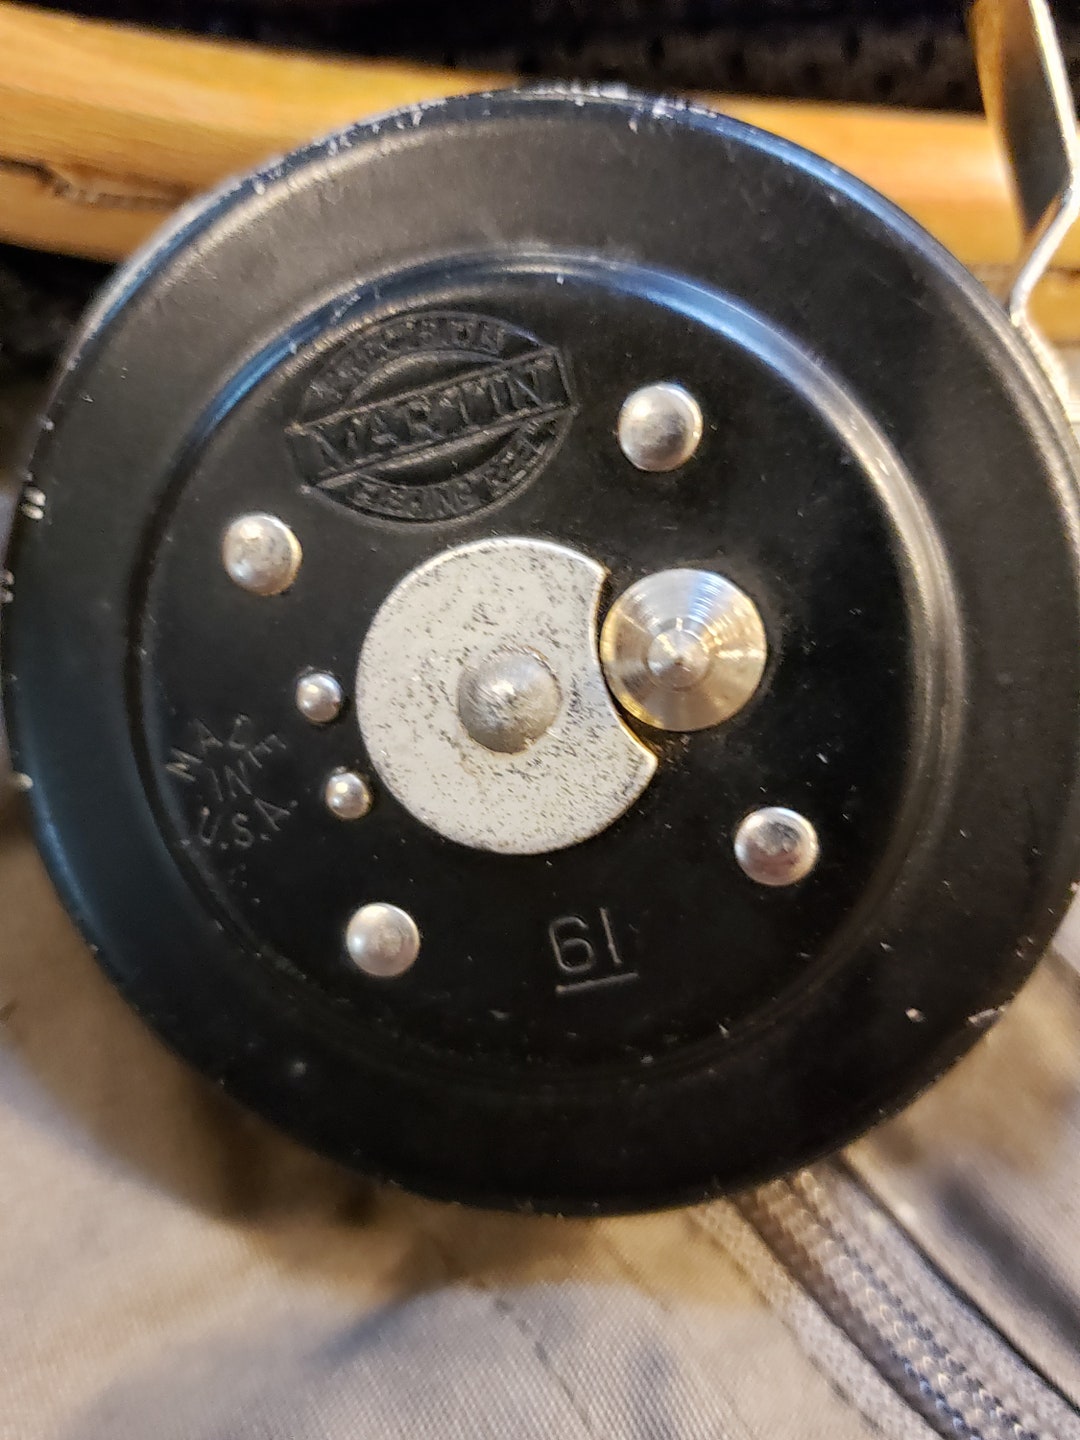 Vintage Classic Martin 61 Fly Fishing Reel Retro Tackle